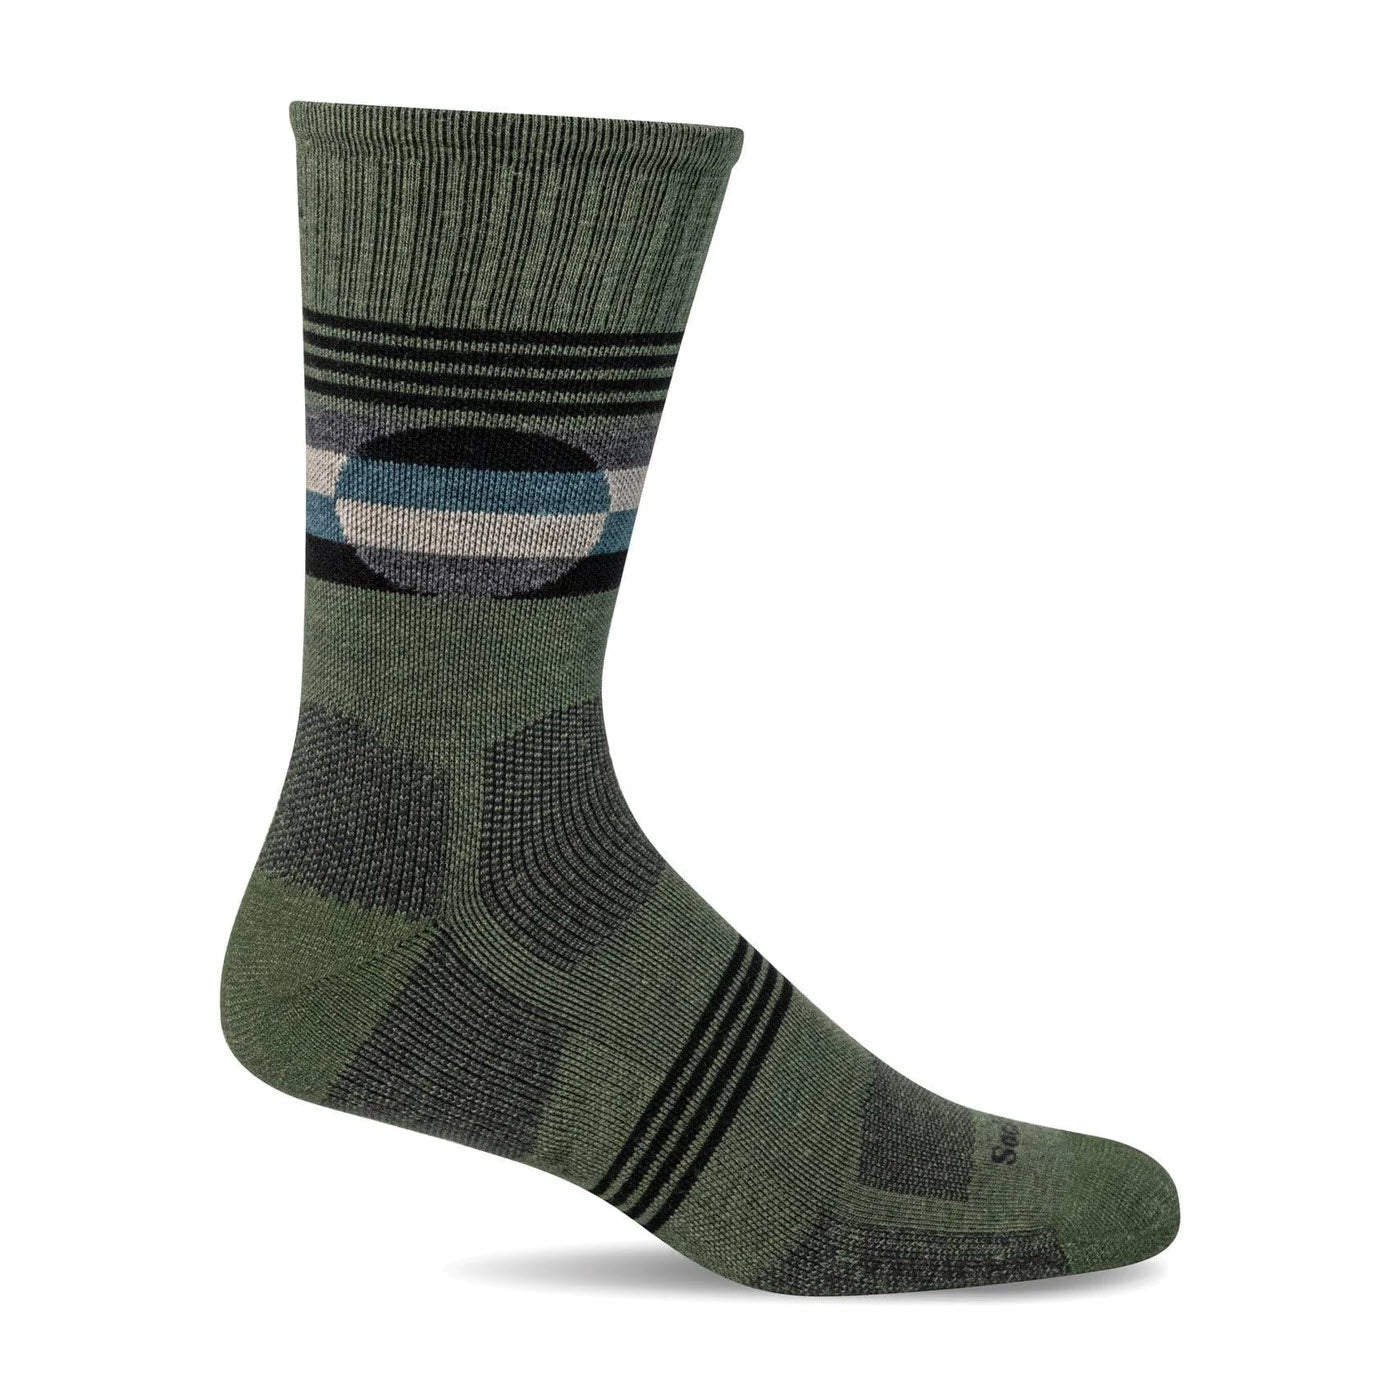 Green camouflage-patterned SOCKWELL NORTH RIM 15-20 COMPRESSION HIKE SOCK displayed on a plain white background.